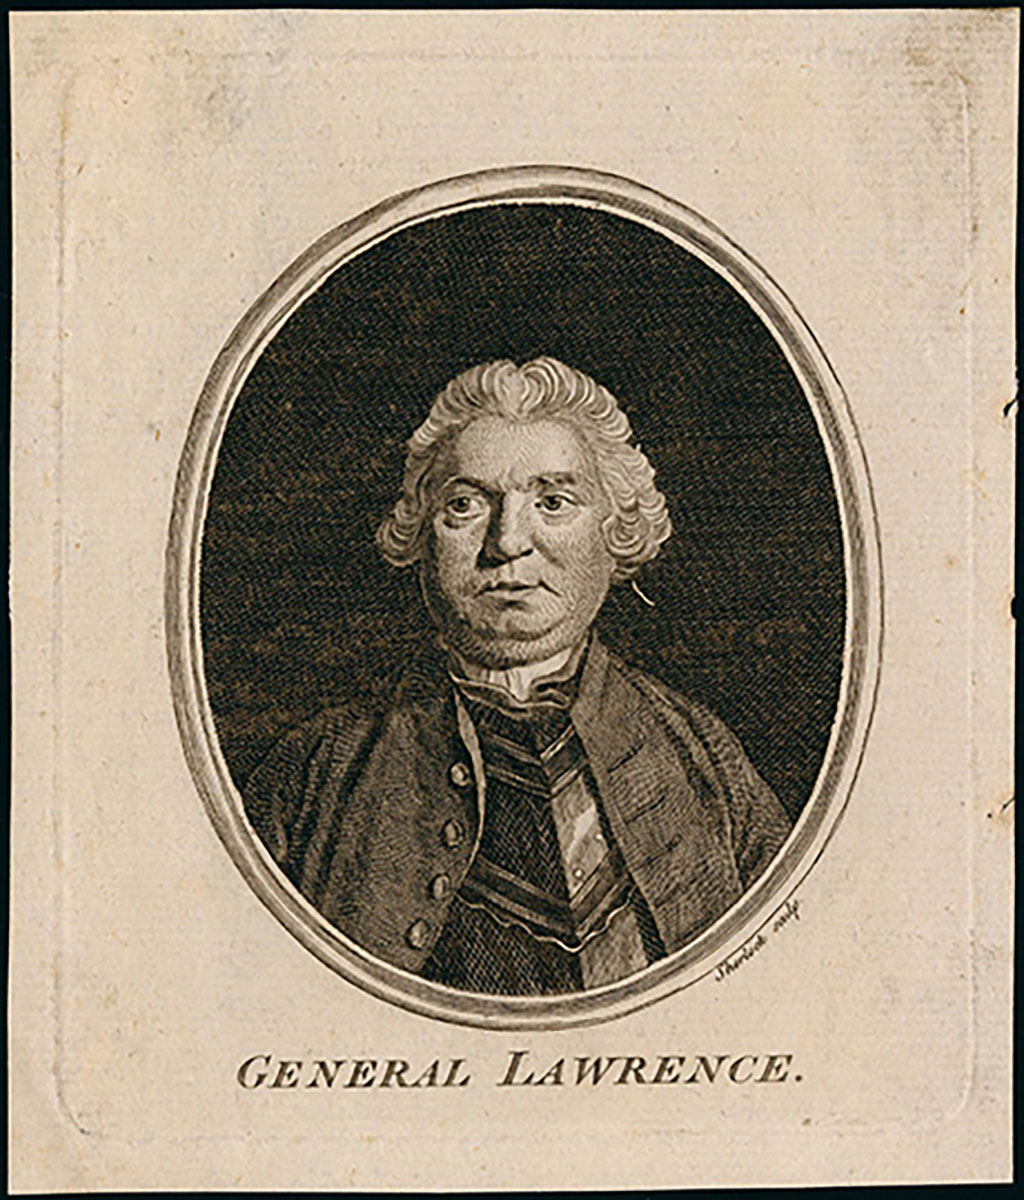 Artist rendering of General Lawrence in wig and dress of the day.